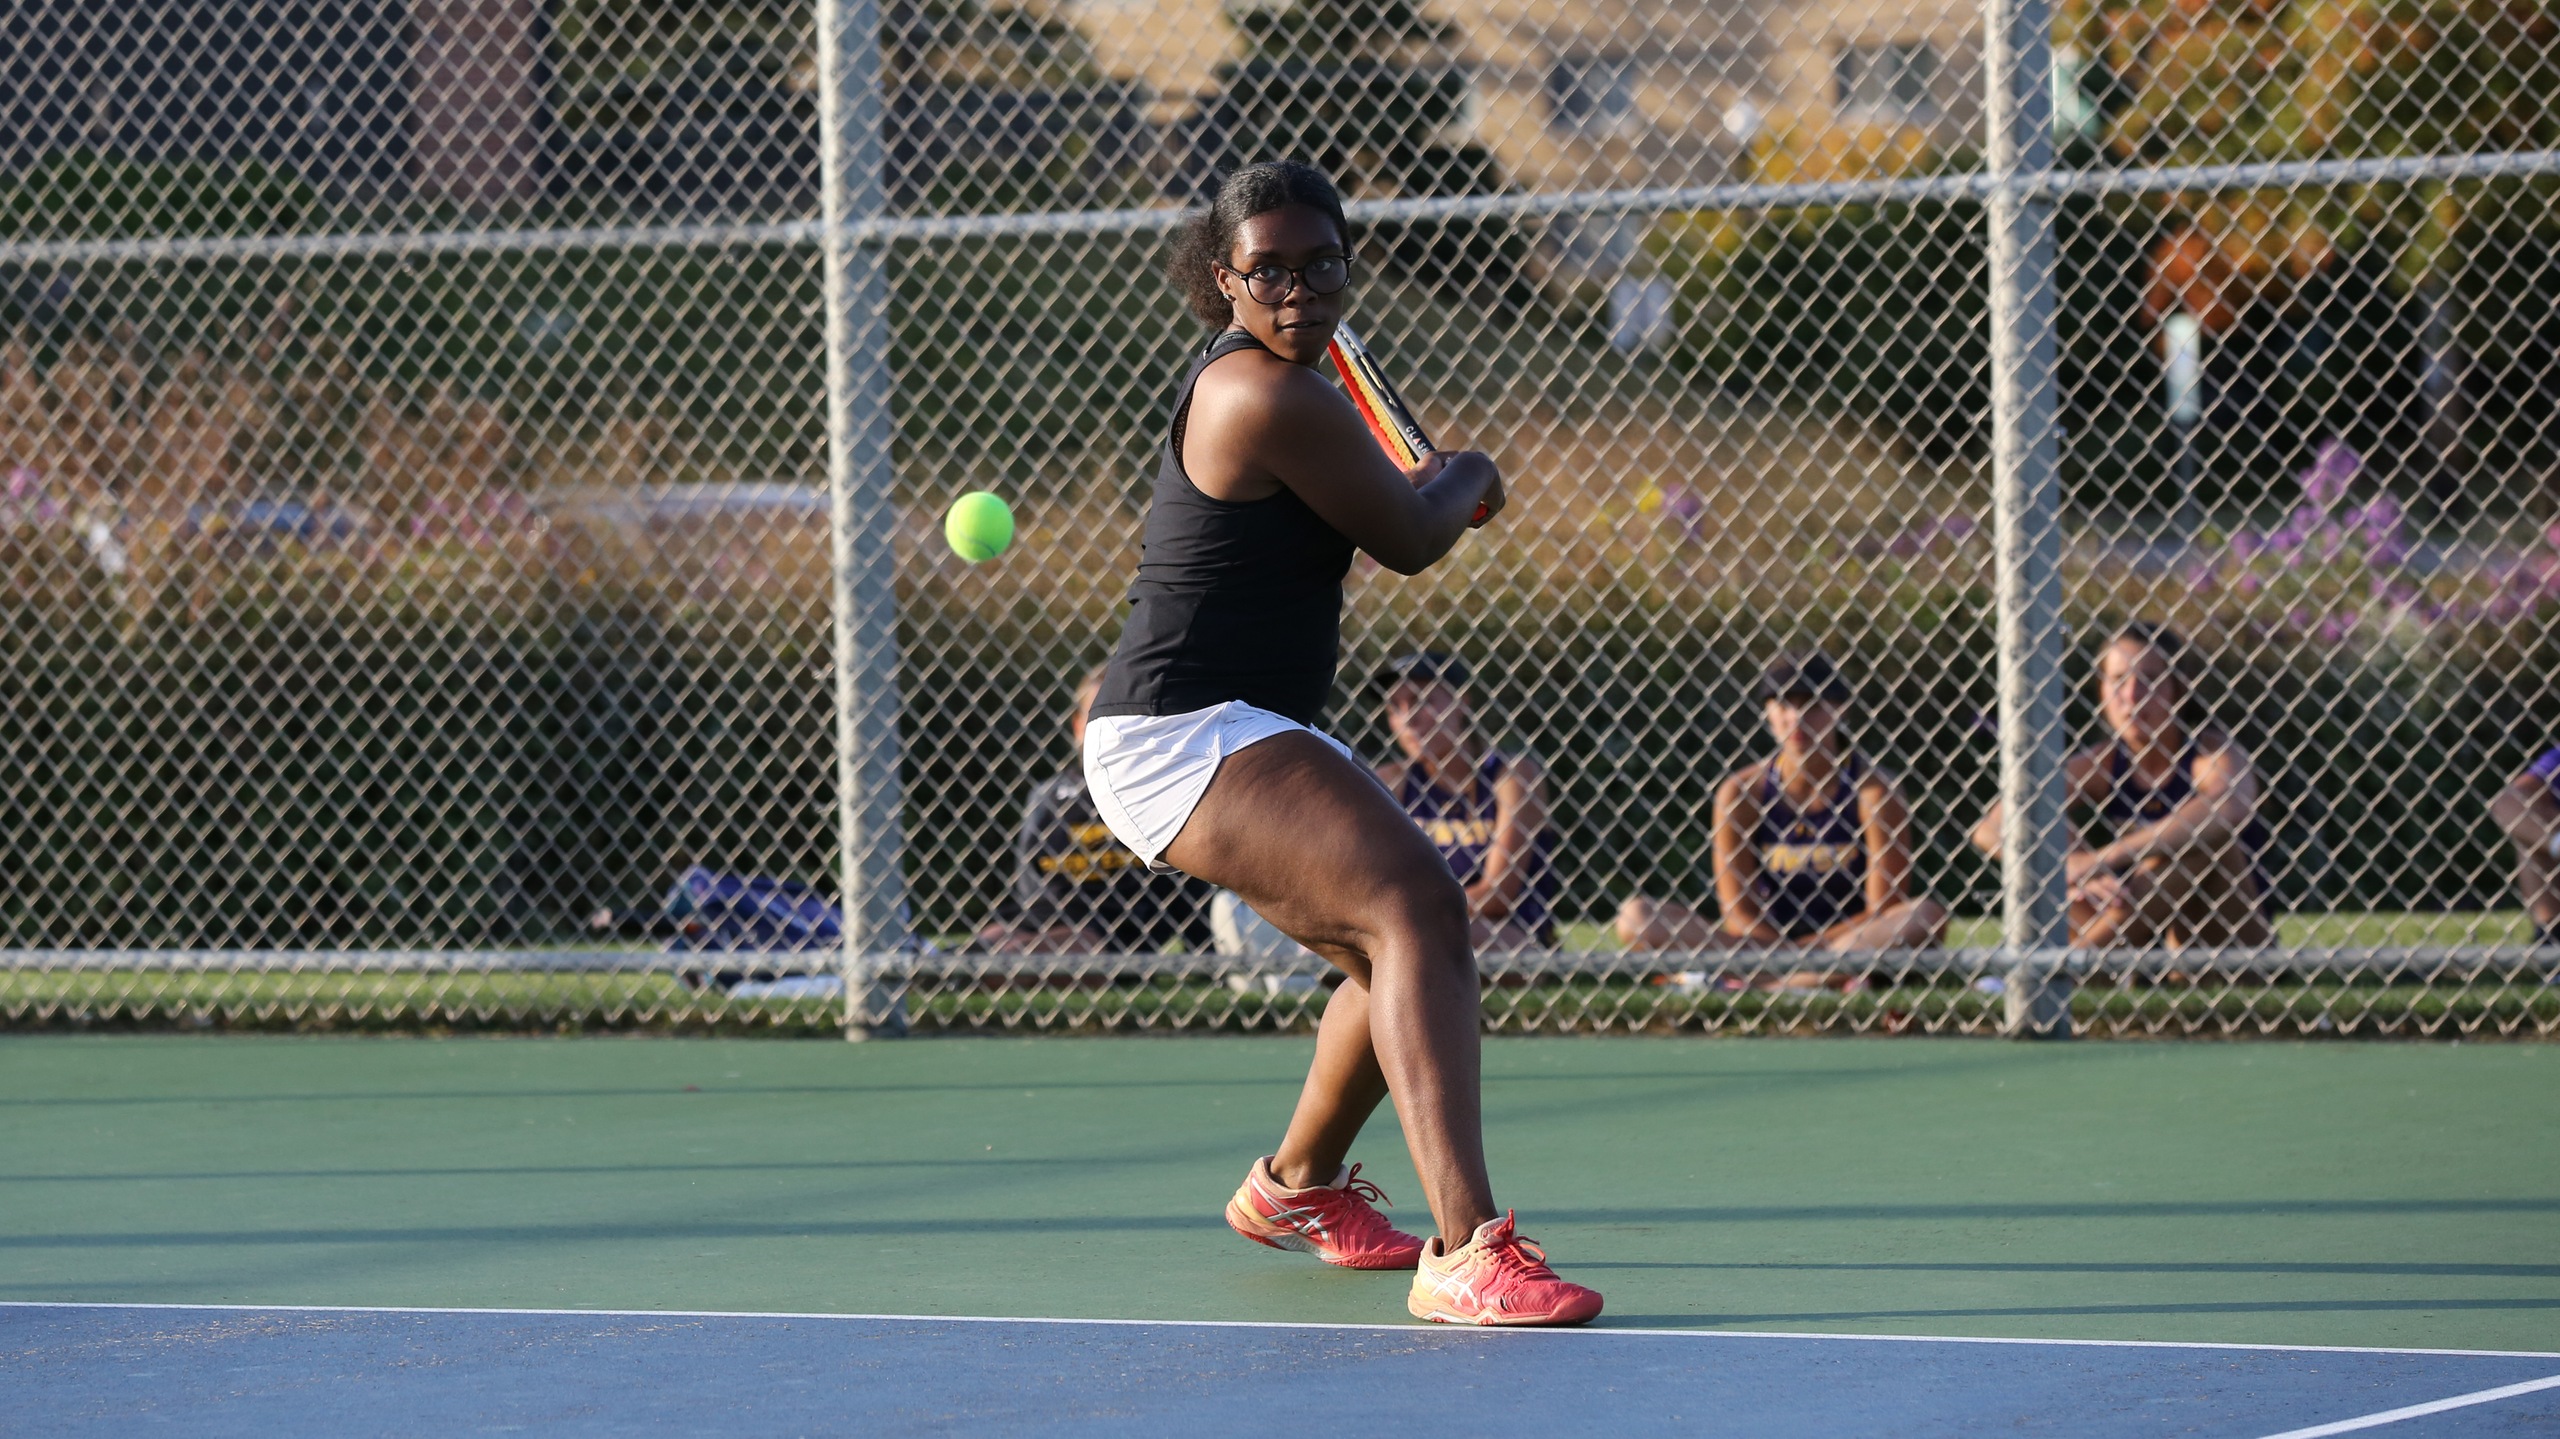 Michelle Spicer represented the Titans at both No. 1 singles and No. 1 doubles against the Blugolds.